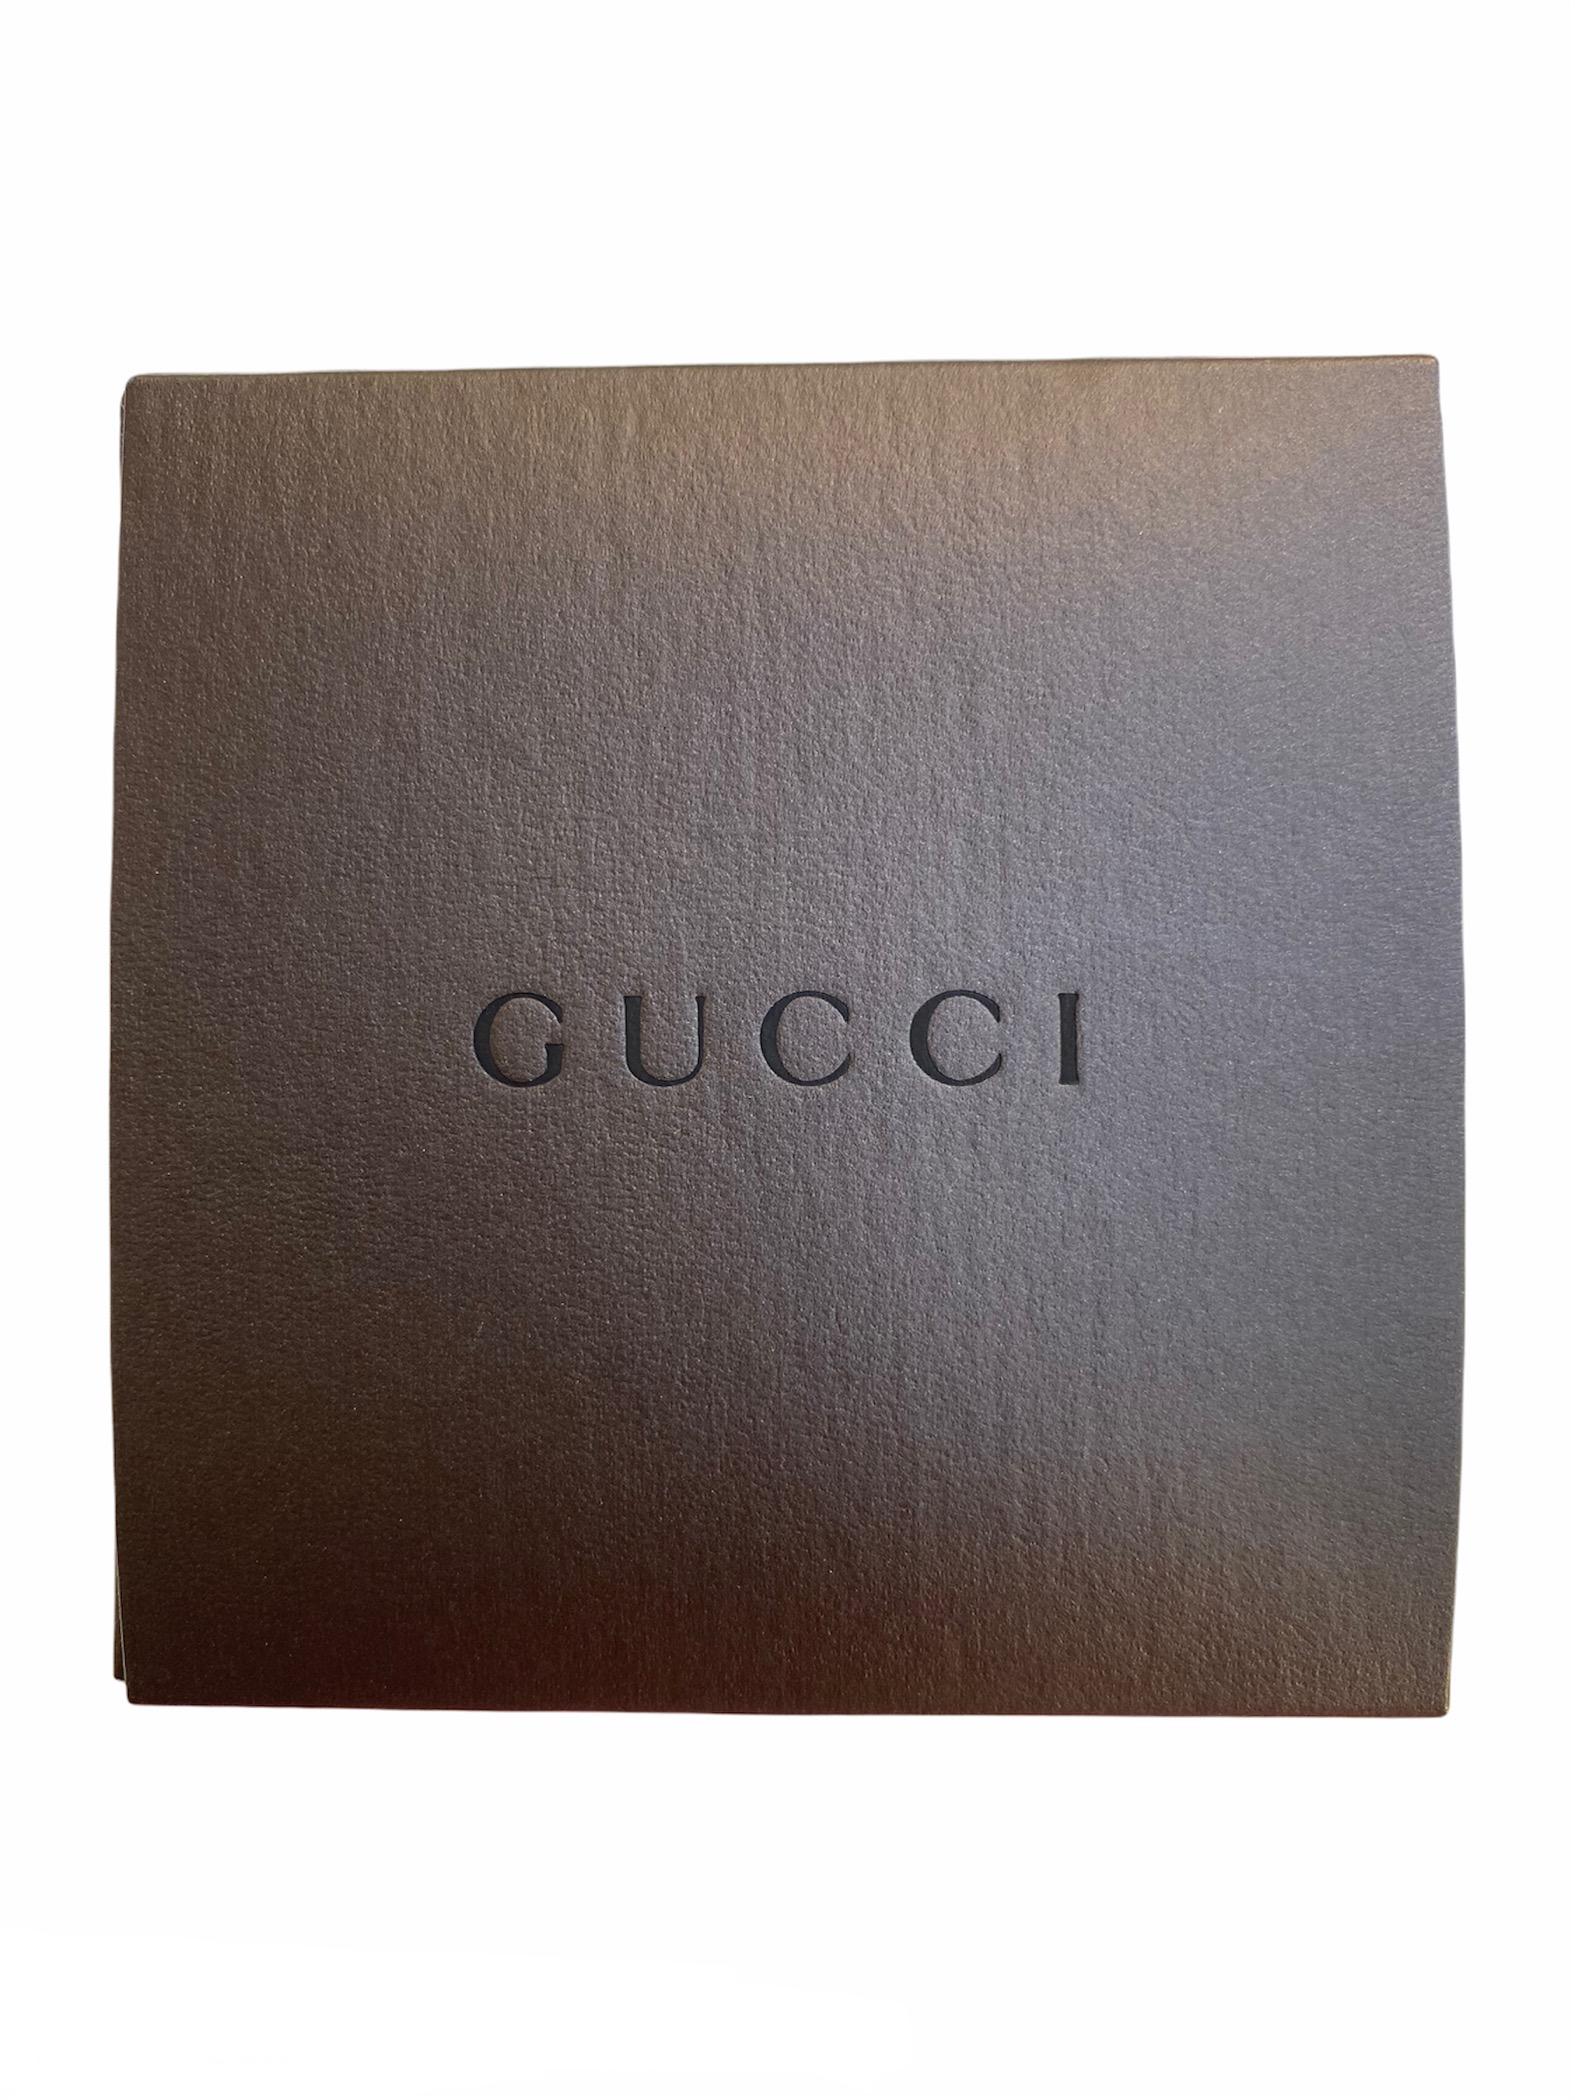 Contemporary New GUCCI Stainless Steel Ladies Watch Gold Colour White Dial with Box